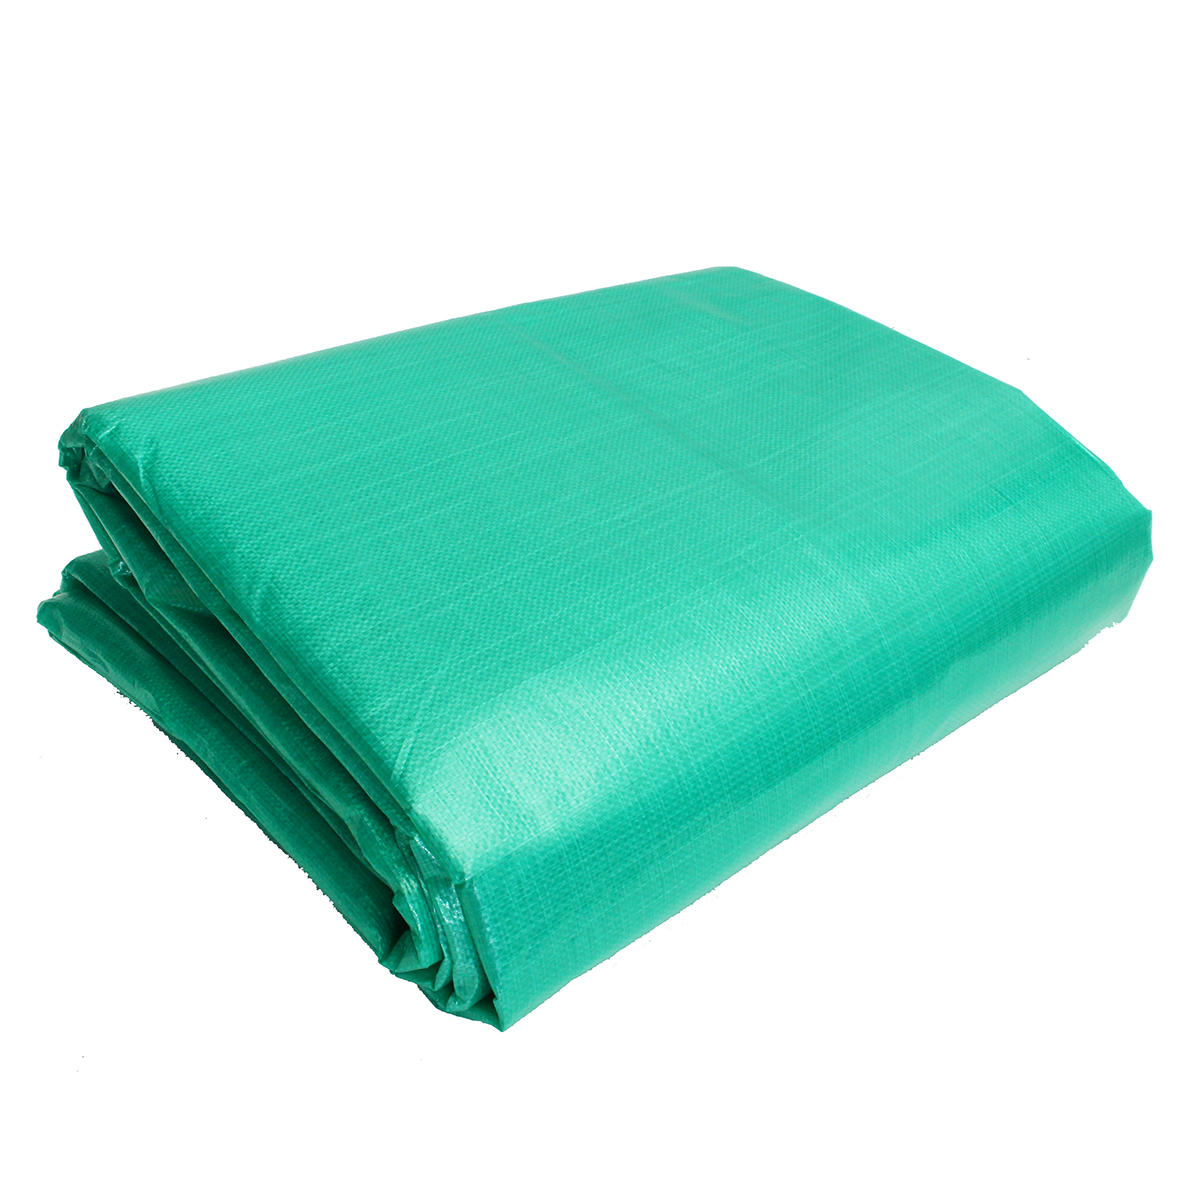 PE 6 × 3,6 m / 19,7 × 11,8ft Outdoor Outdoor Camping Namiot obozowy namiot obozowy Cover Cover baldachim